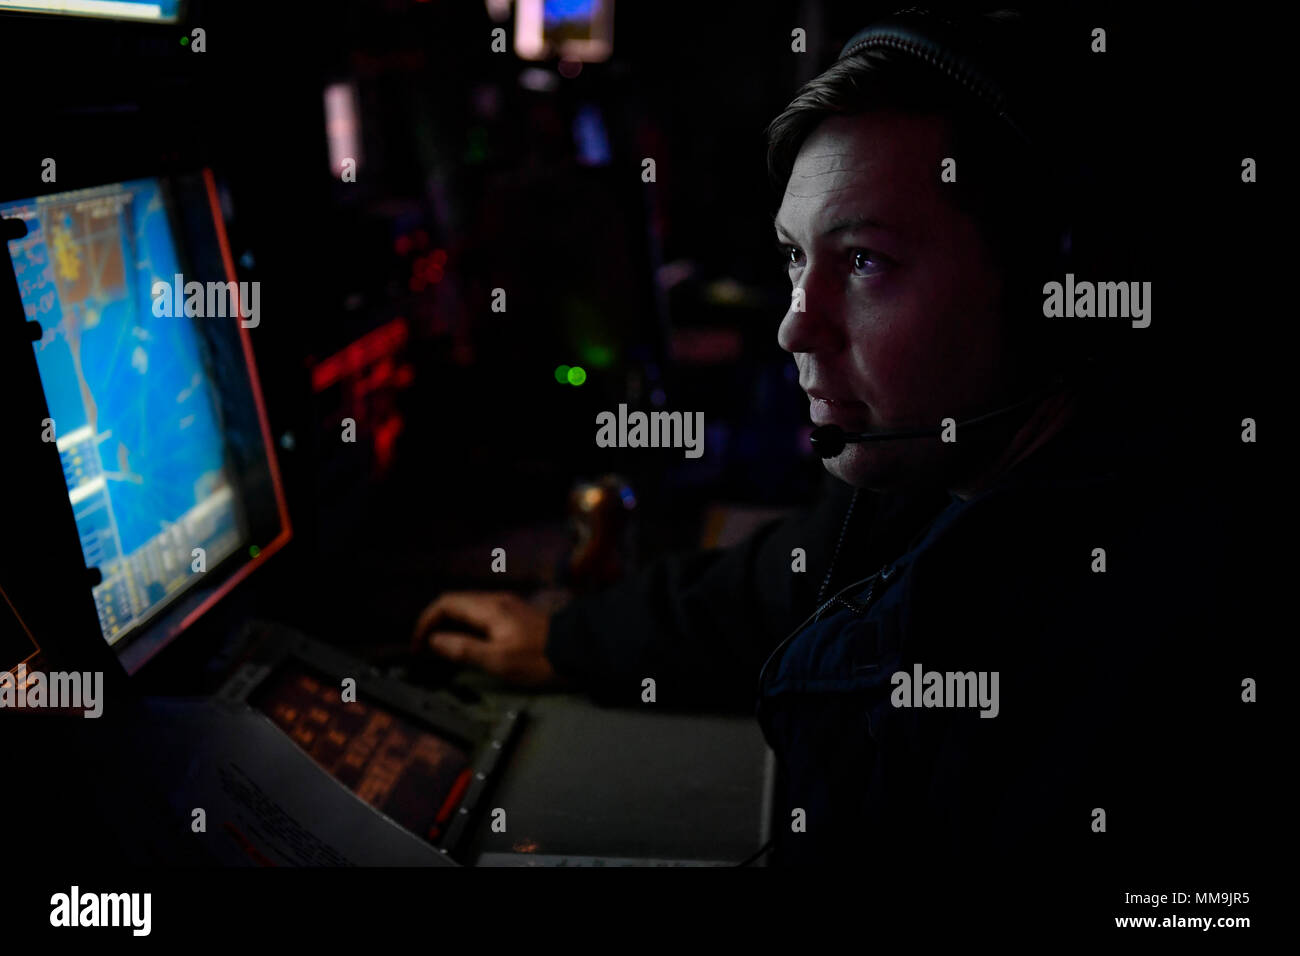 170915-N-UY653-206 BALTIC SEA (Sept. 15, 2017) Operations Specialist 2nd Class Jonathan Materni stands watch in the combat information center aboard the Arleigh Burke-class guided-missile destroyer USS Oscar Austin (DDG 79). Oscar Austin is on a routine deployment supporting U.S. national security interests in Europe, and increasing theater security cooperation and forward naval presence in the U.S. 6th Fleet area of operations. (U.S. Navy photo by Mass Communication Specialist 2nd Class Ryan Utah Kledzik/Released) Stock Photo